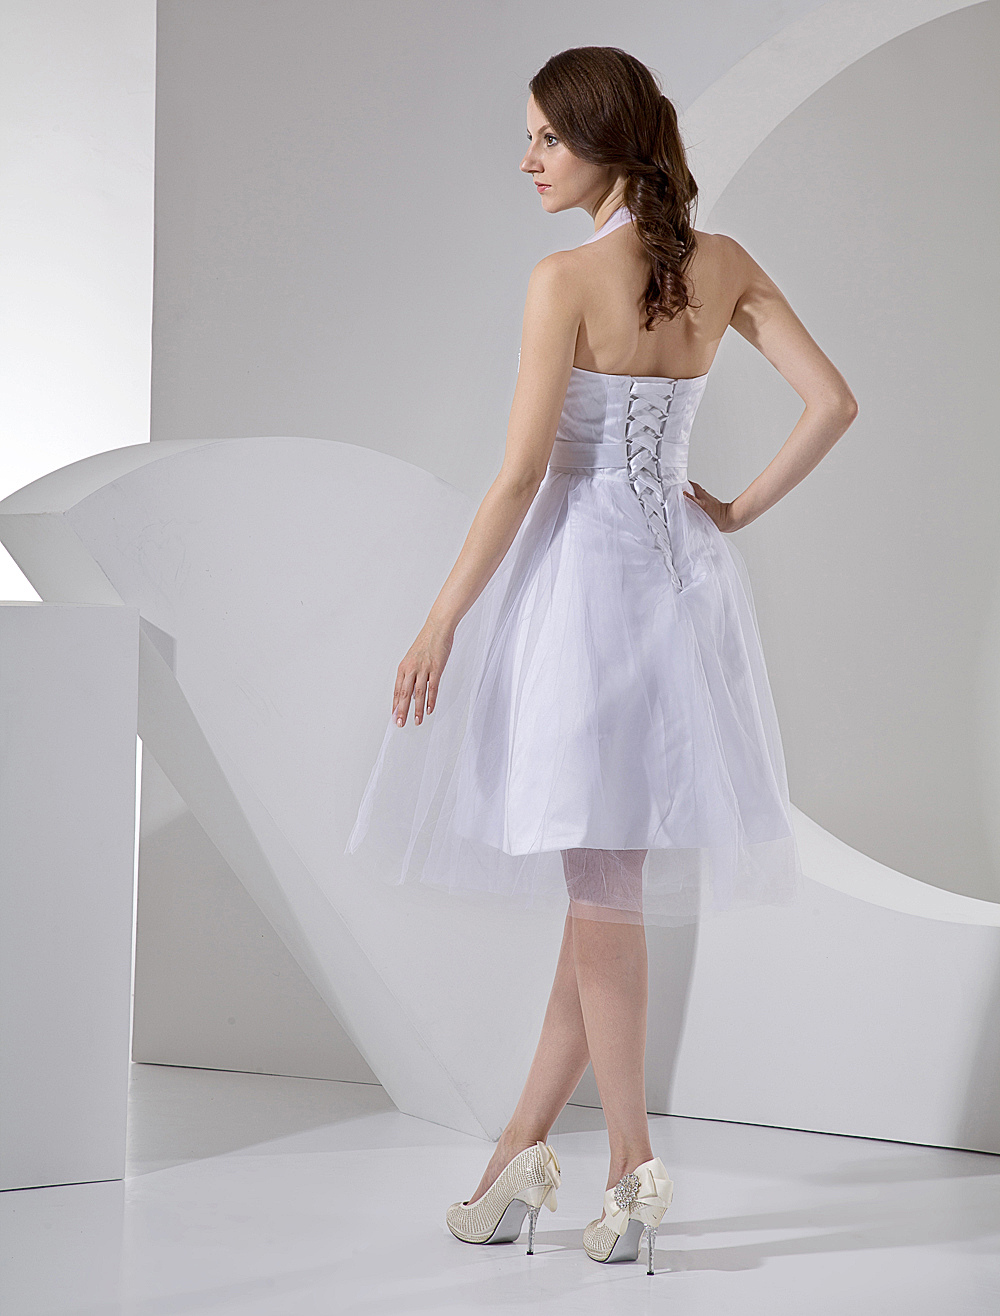  White Mini Wedding Dress in the world Don t miss out 